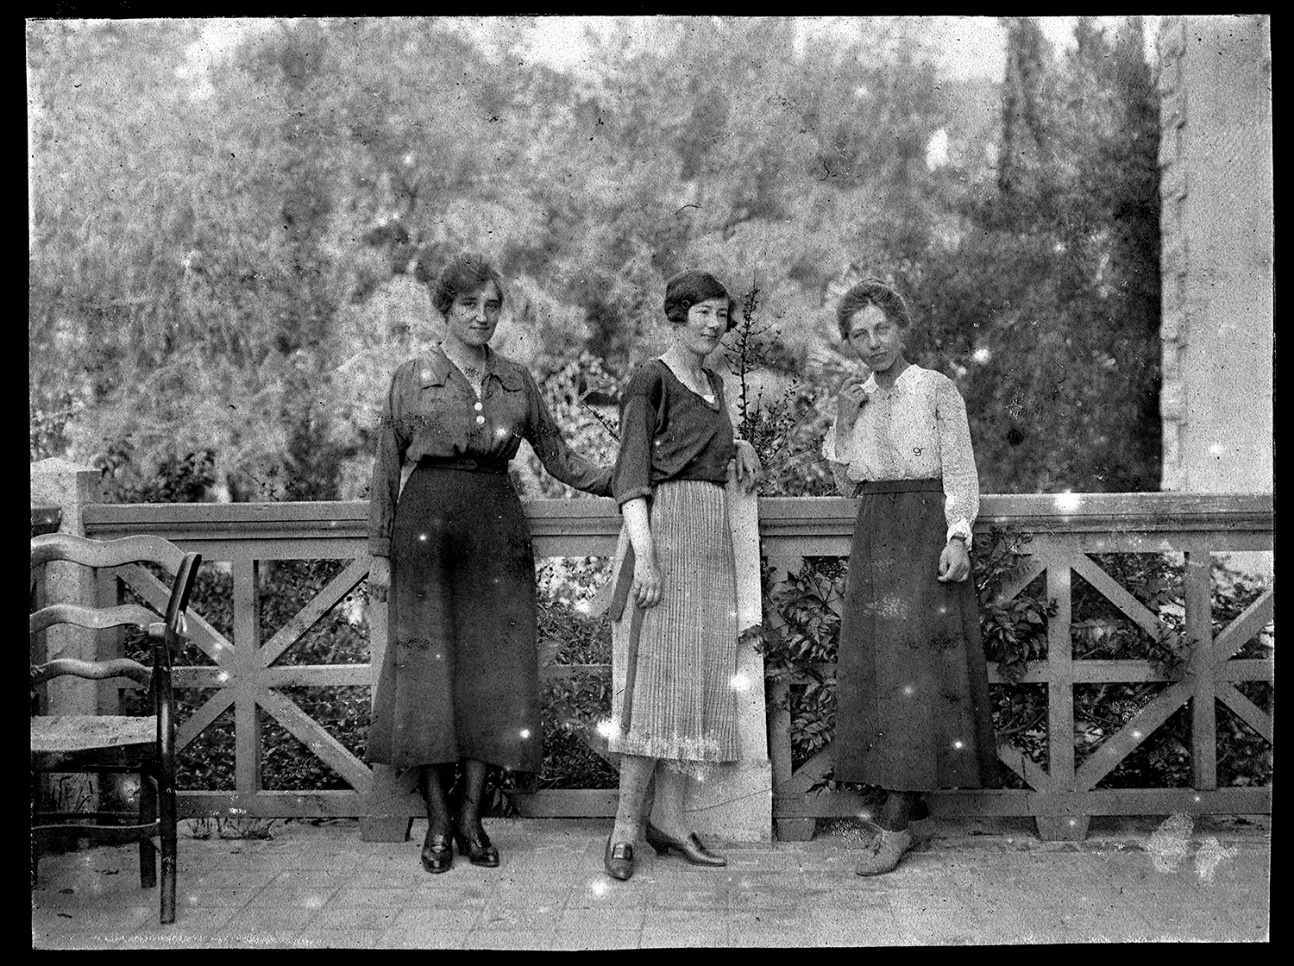 Lillian Chandler, Winnifred Lamb and Mary Herford 1921 at the BSA. (from the BSA Archive)